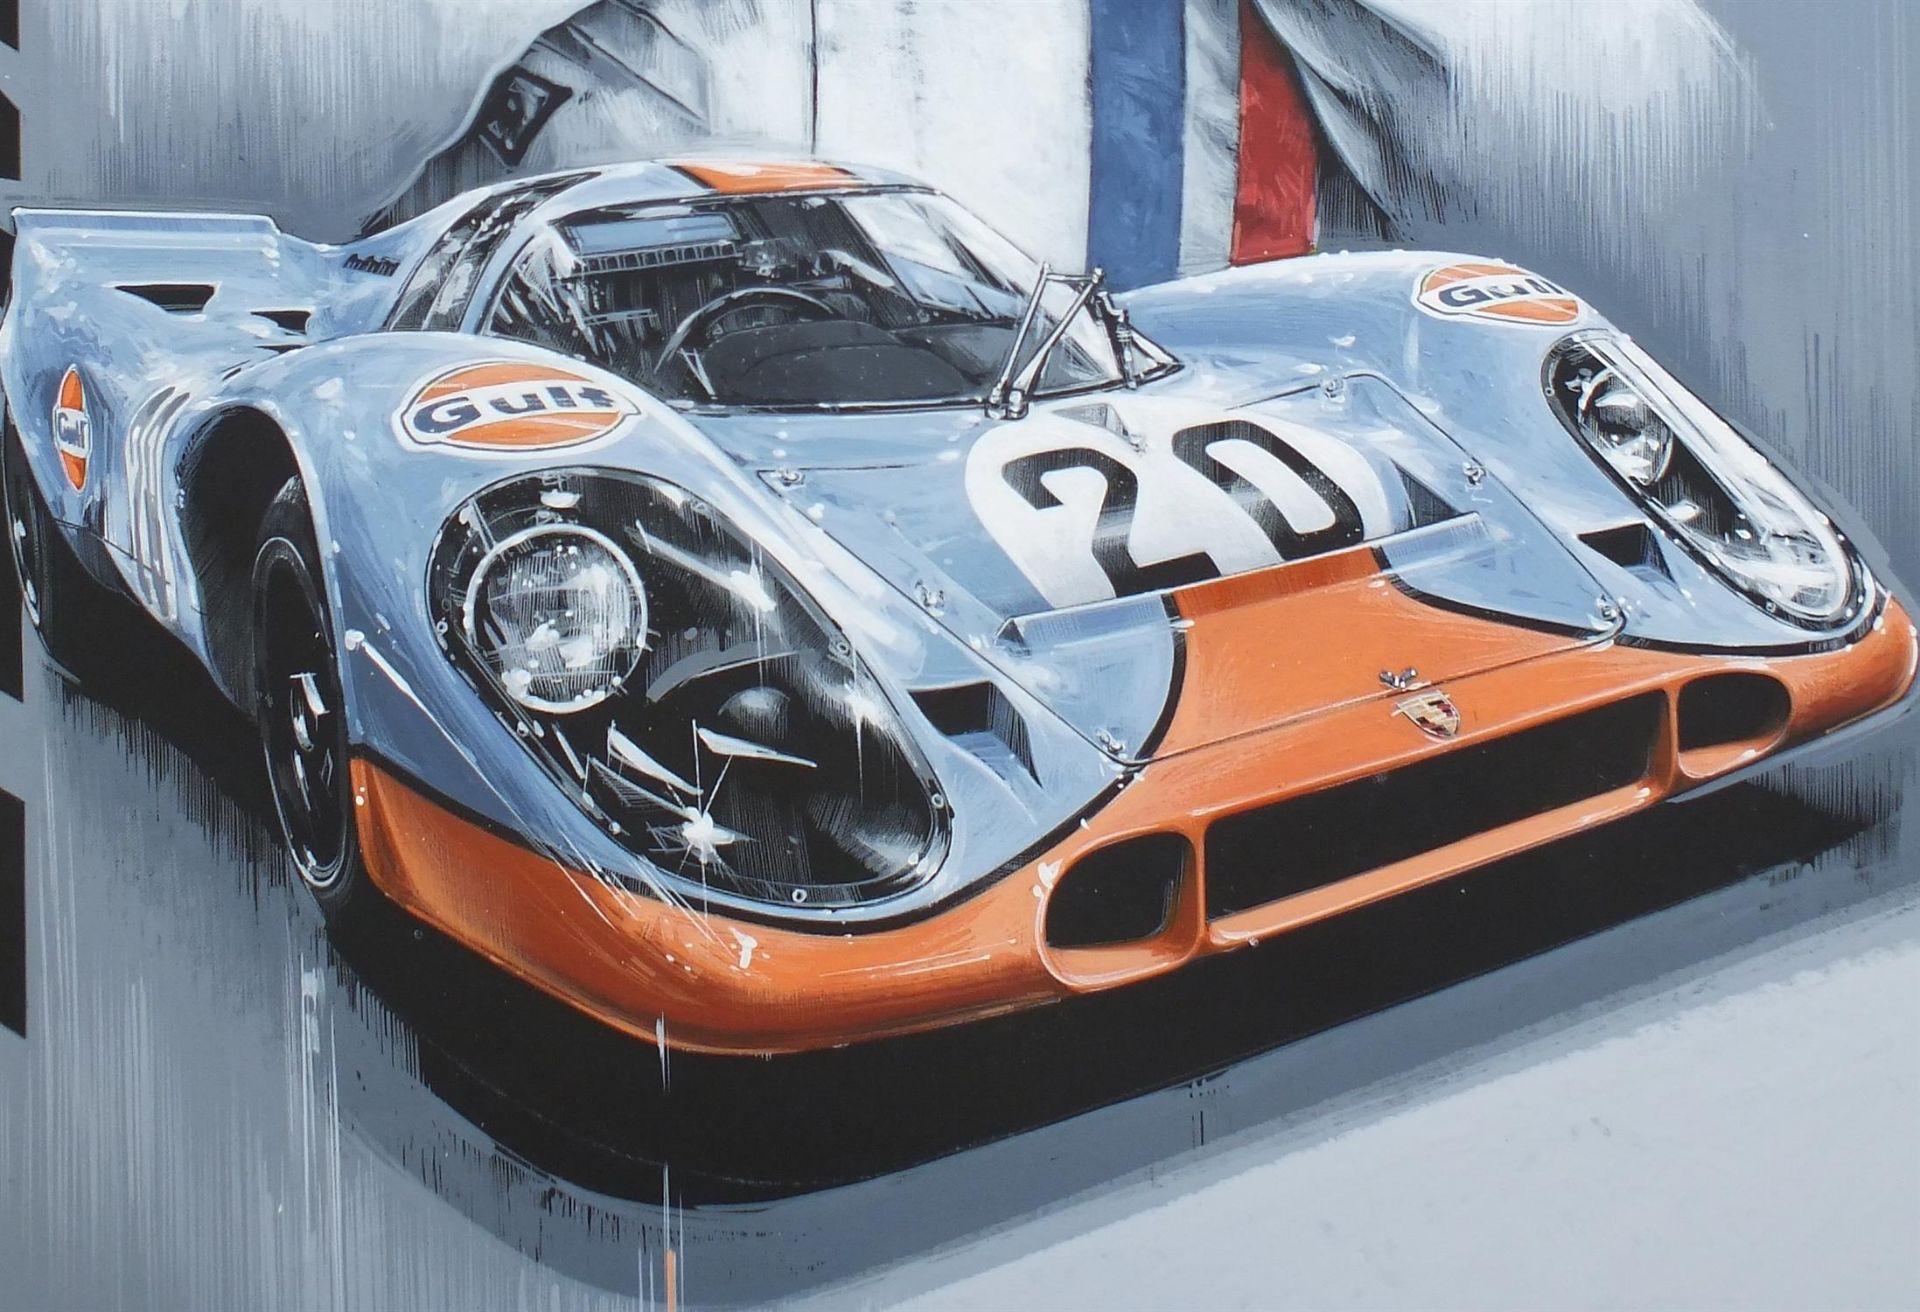 Mr McQueen and the 917. Original Acrylic by Tony Upson - Image 5 of 6